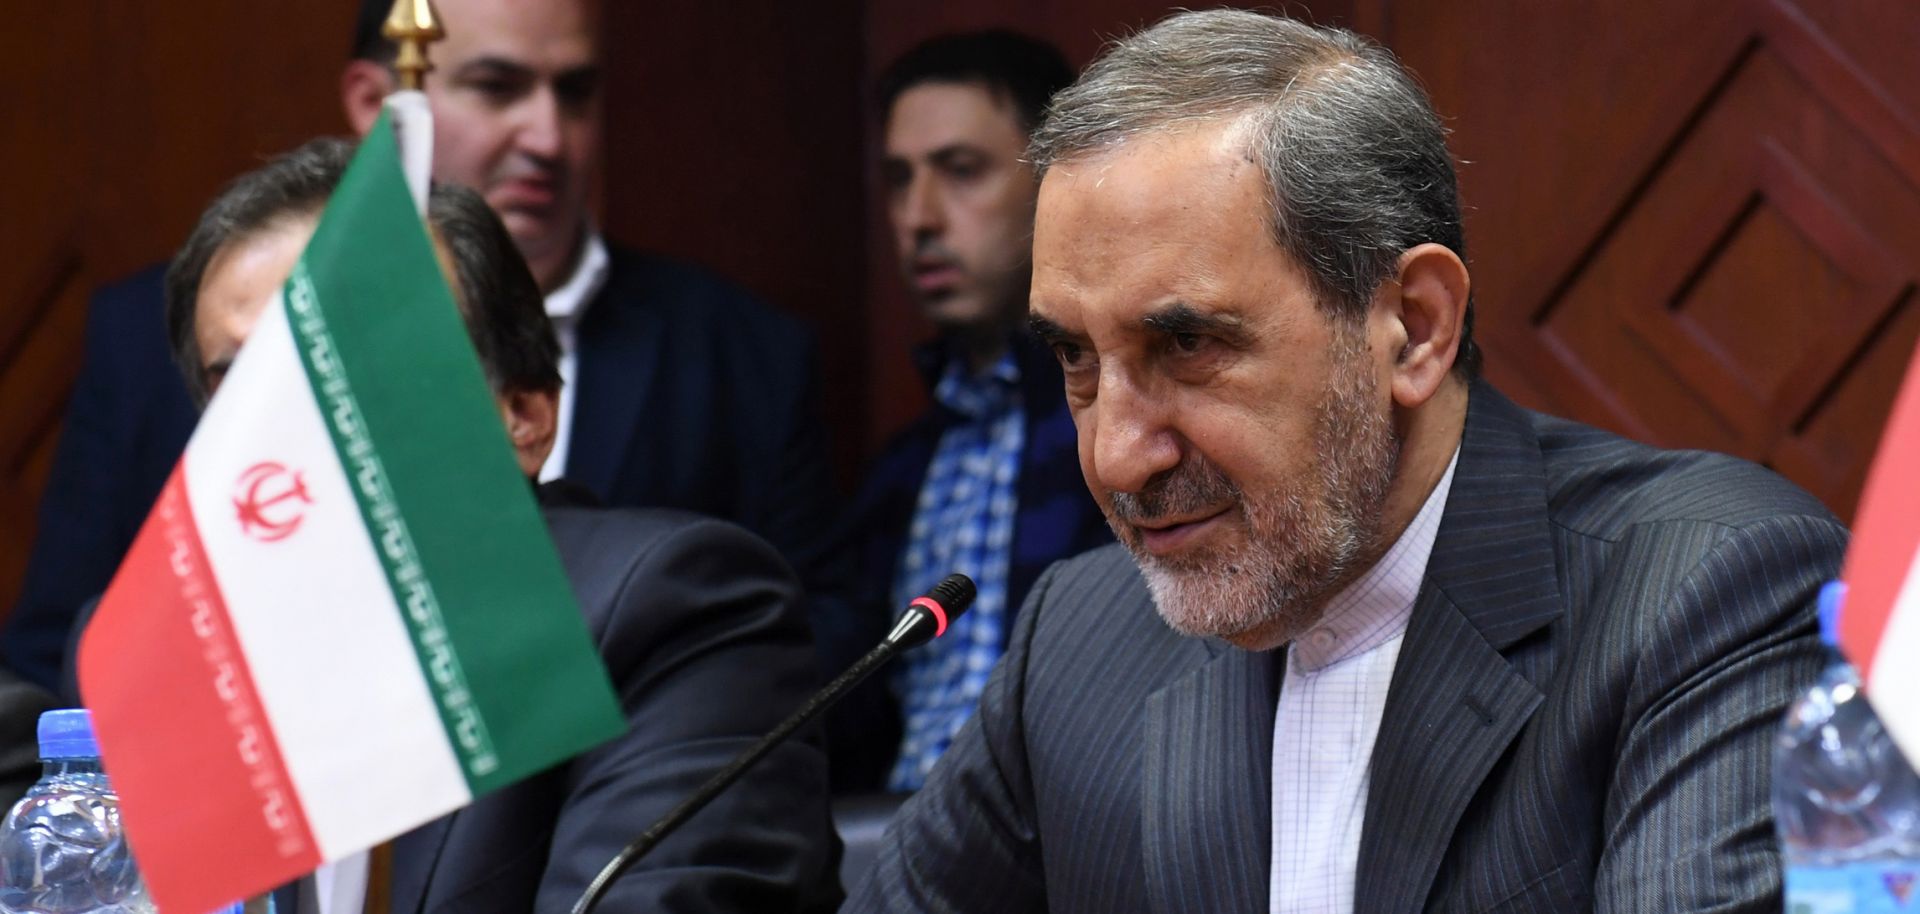 Iranian Supreme Leader Ayatollah Ali Khamenei's chief foreign policy adviser, Ali Akbar Velayati, oversees an agreement between the University of Aleppo in Syria and Iran's Islamic Azad University in November 2017. Syria is a key component in Iran's foreign policy strategy to extend its influence across the Arab world.